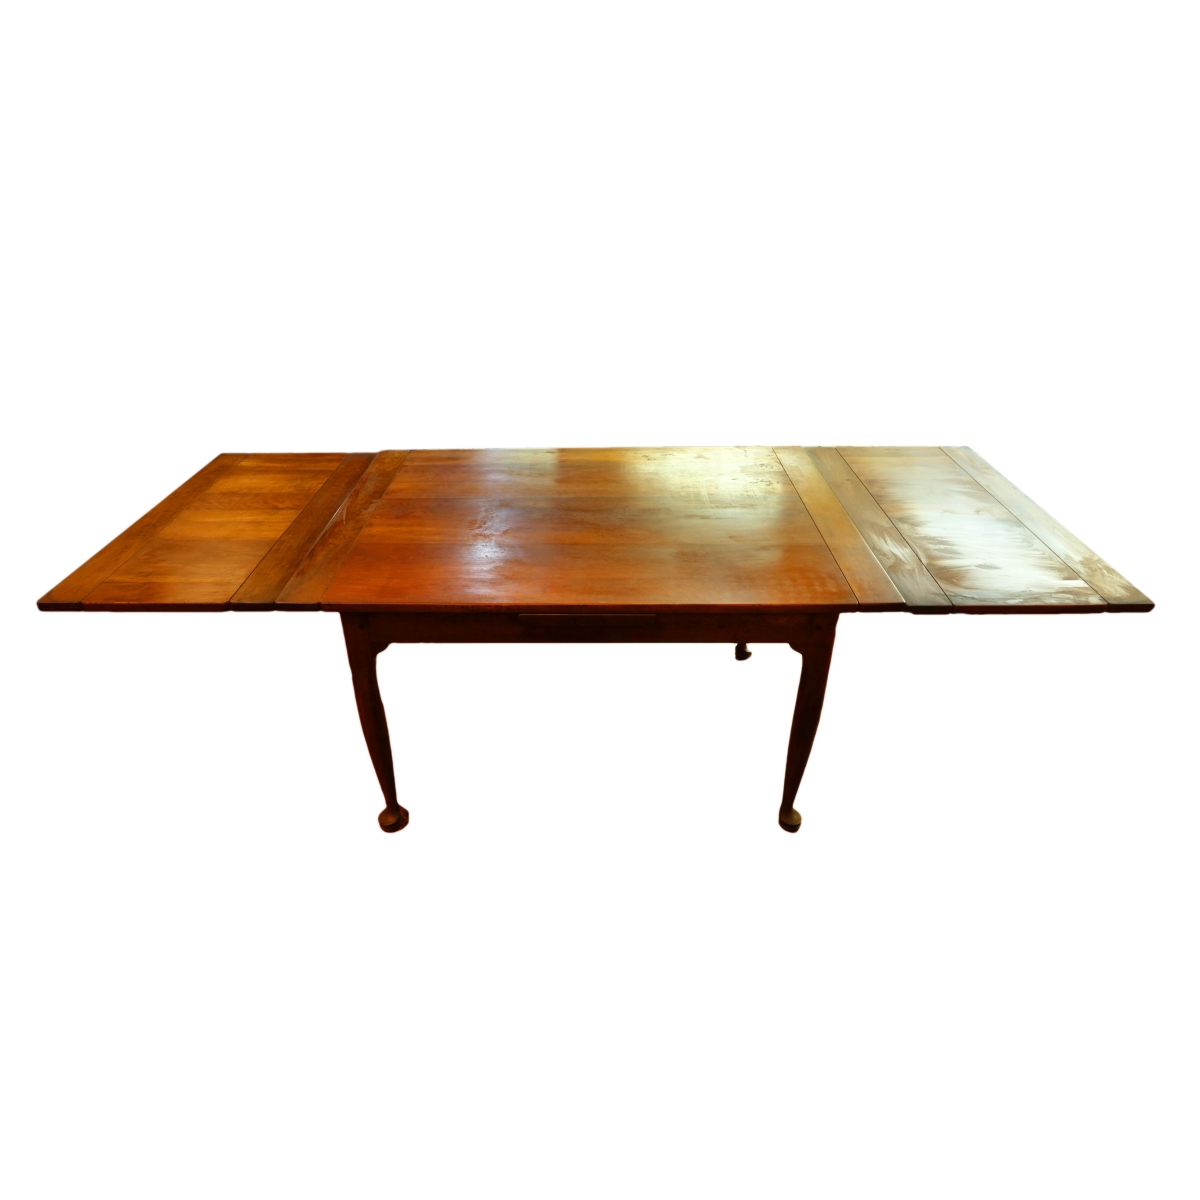 L. & J.G. Stickley Dining Table